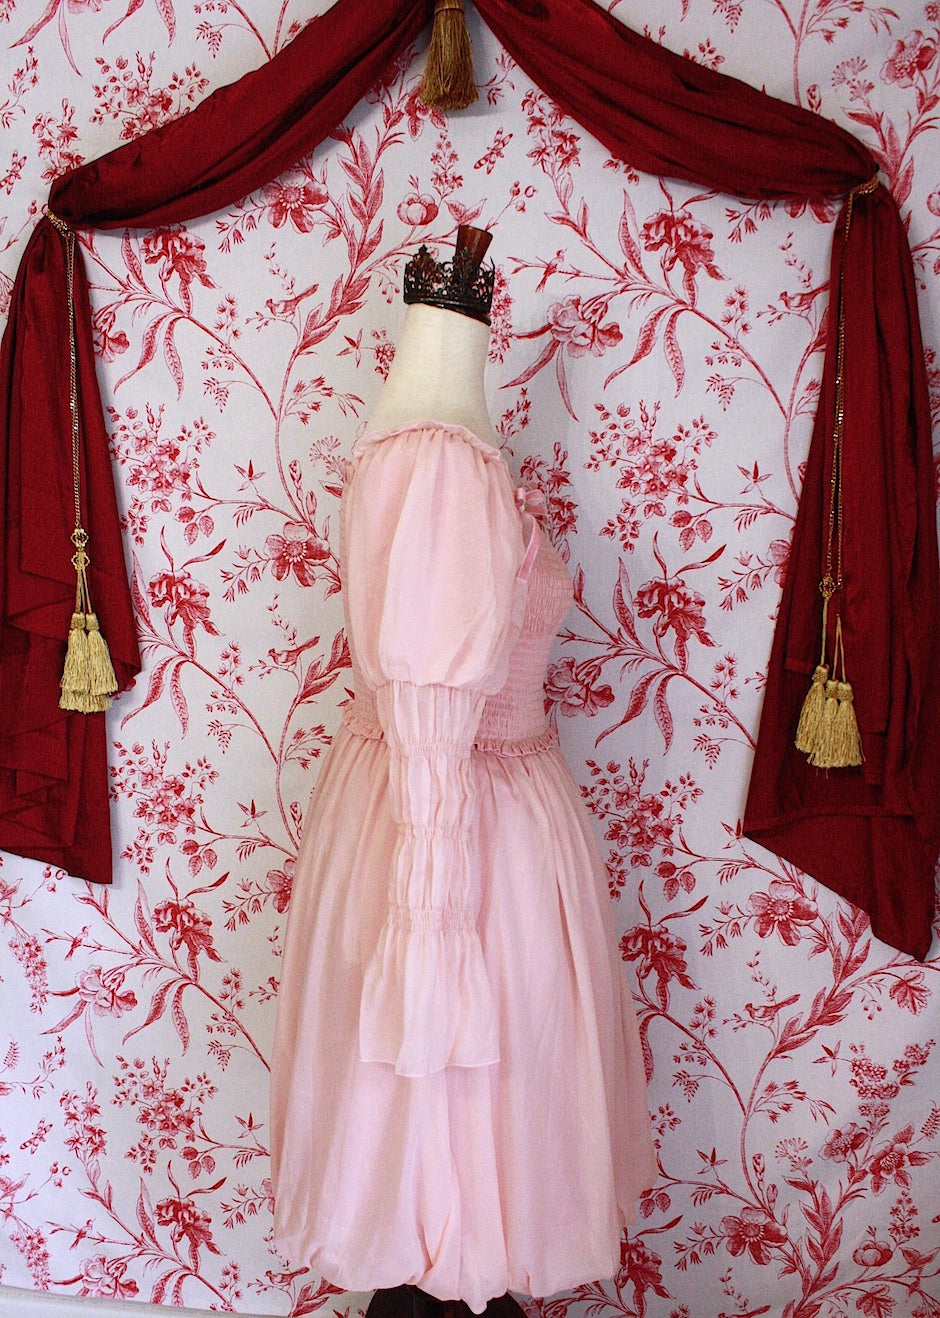 A Historically Inspired Victorian, Regency, Rococo, or Renaissance Style Virago Sleeve Mini Dress with Bow Appliques and Bubble Hem Skirt in Ballerina Pink